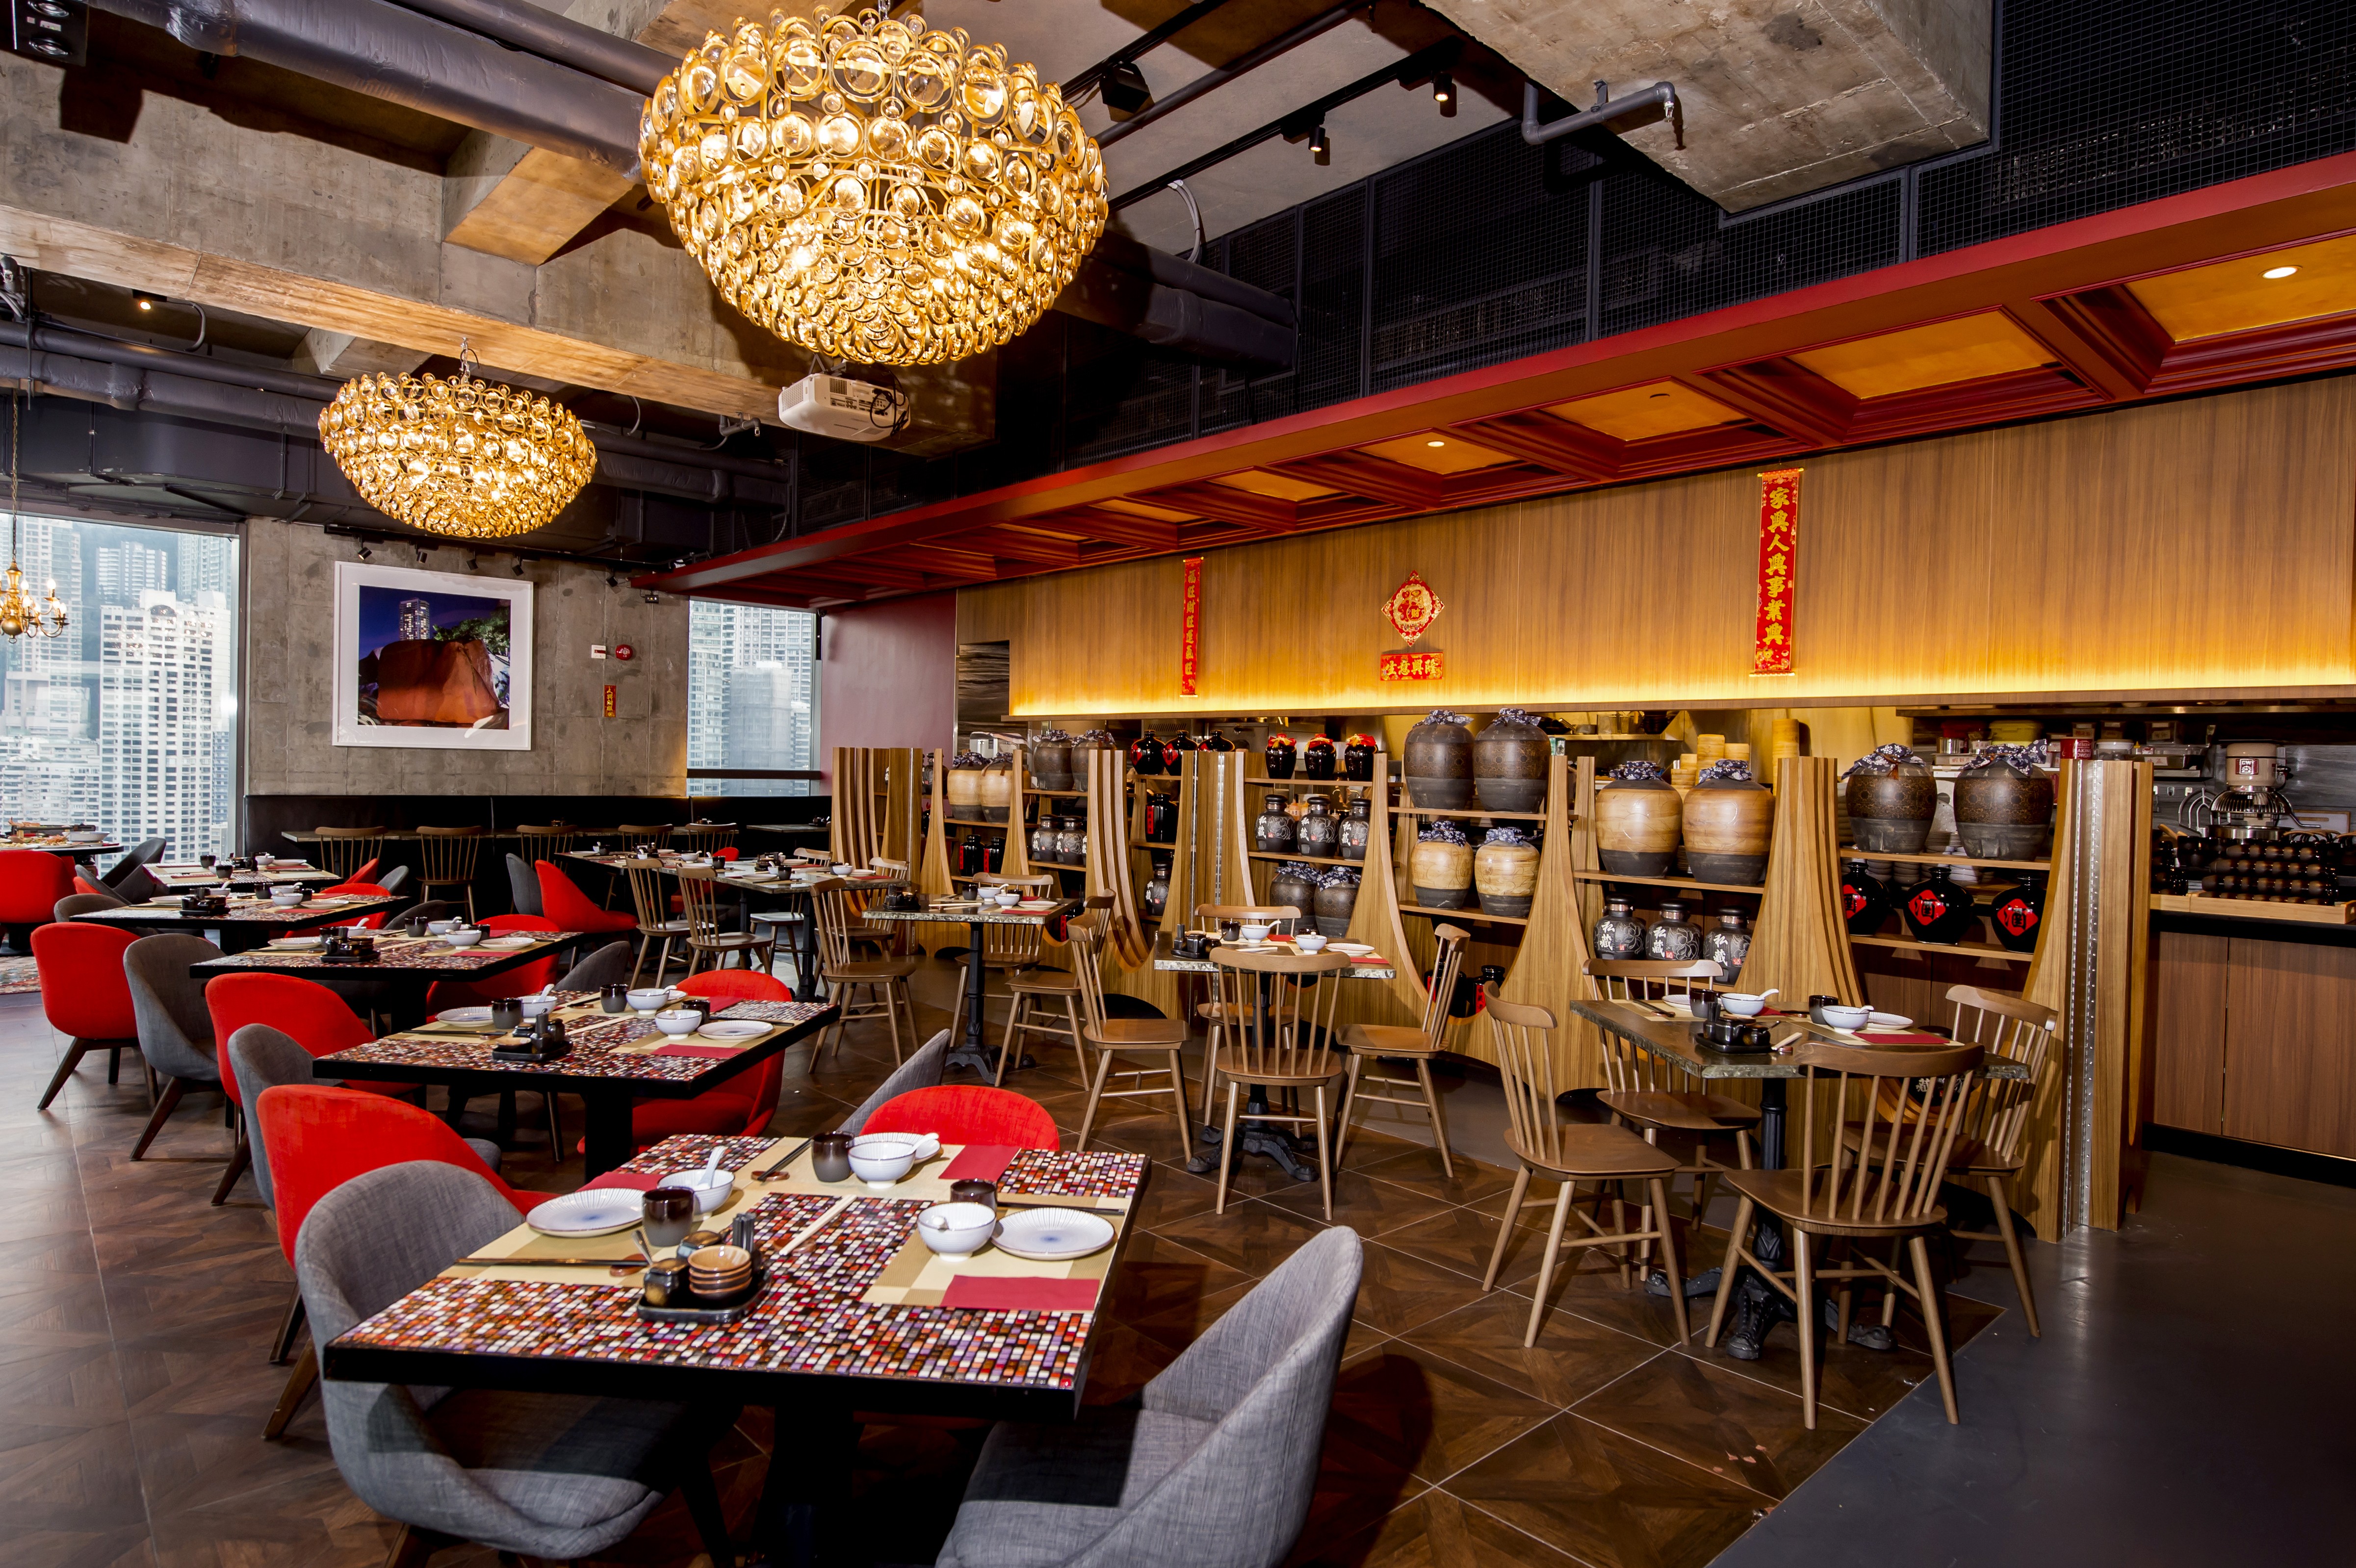 Redhouse dishes up Chinese cuisine with a contemporary touch.